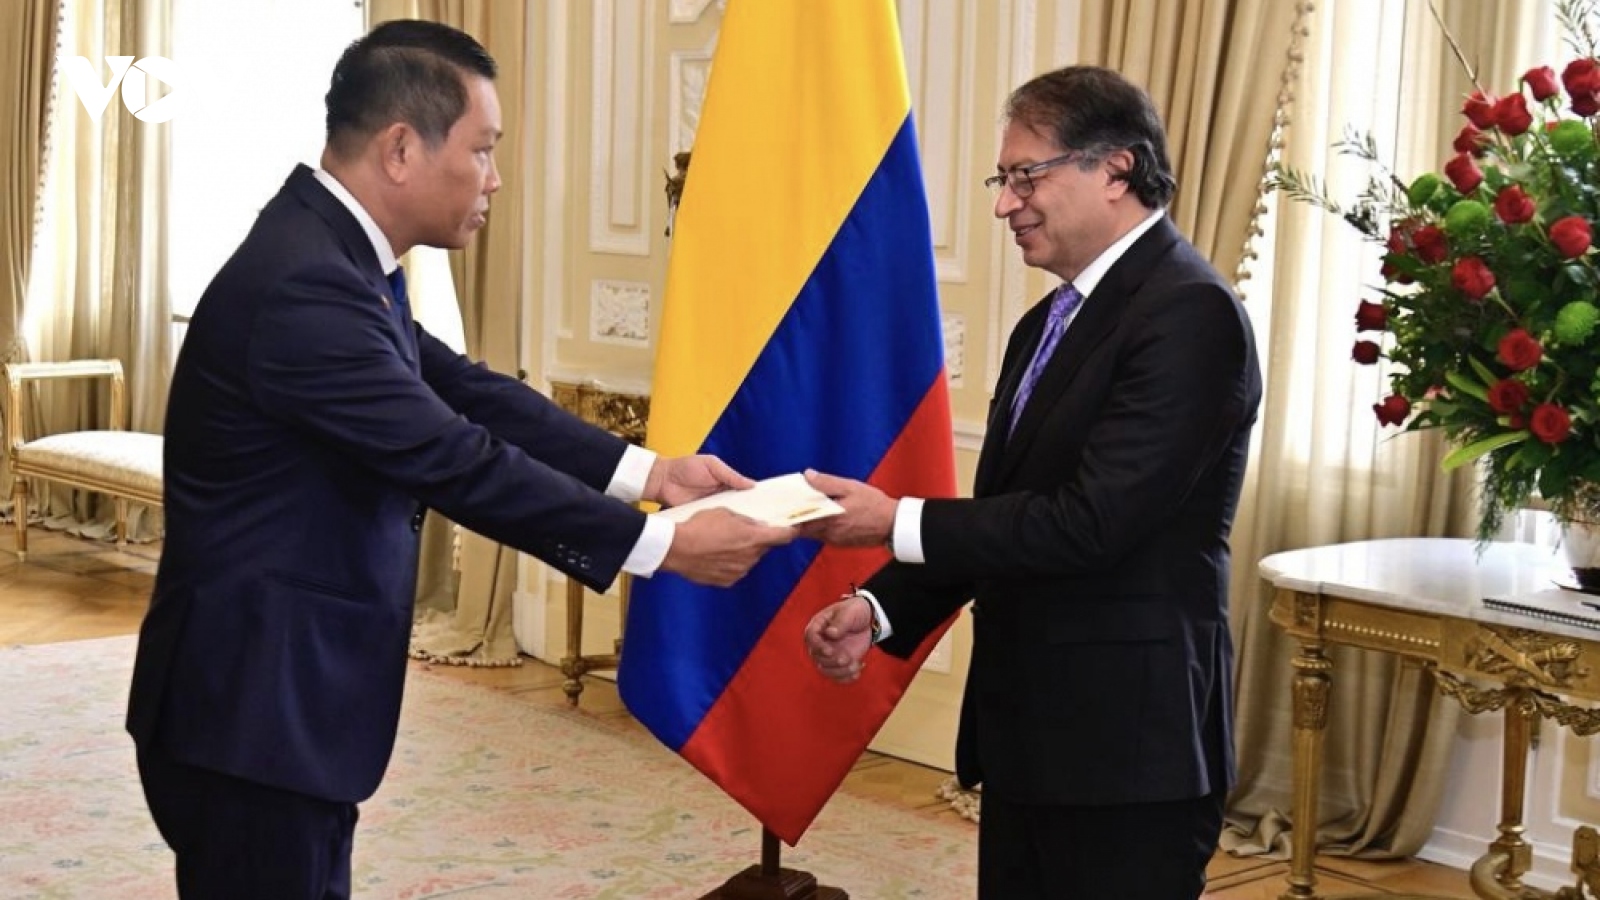 Colombia desires Vietnam to soon open its embassy to further boost relations